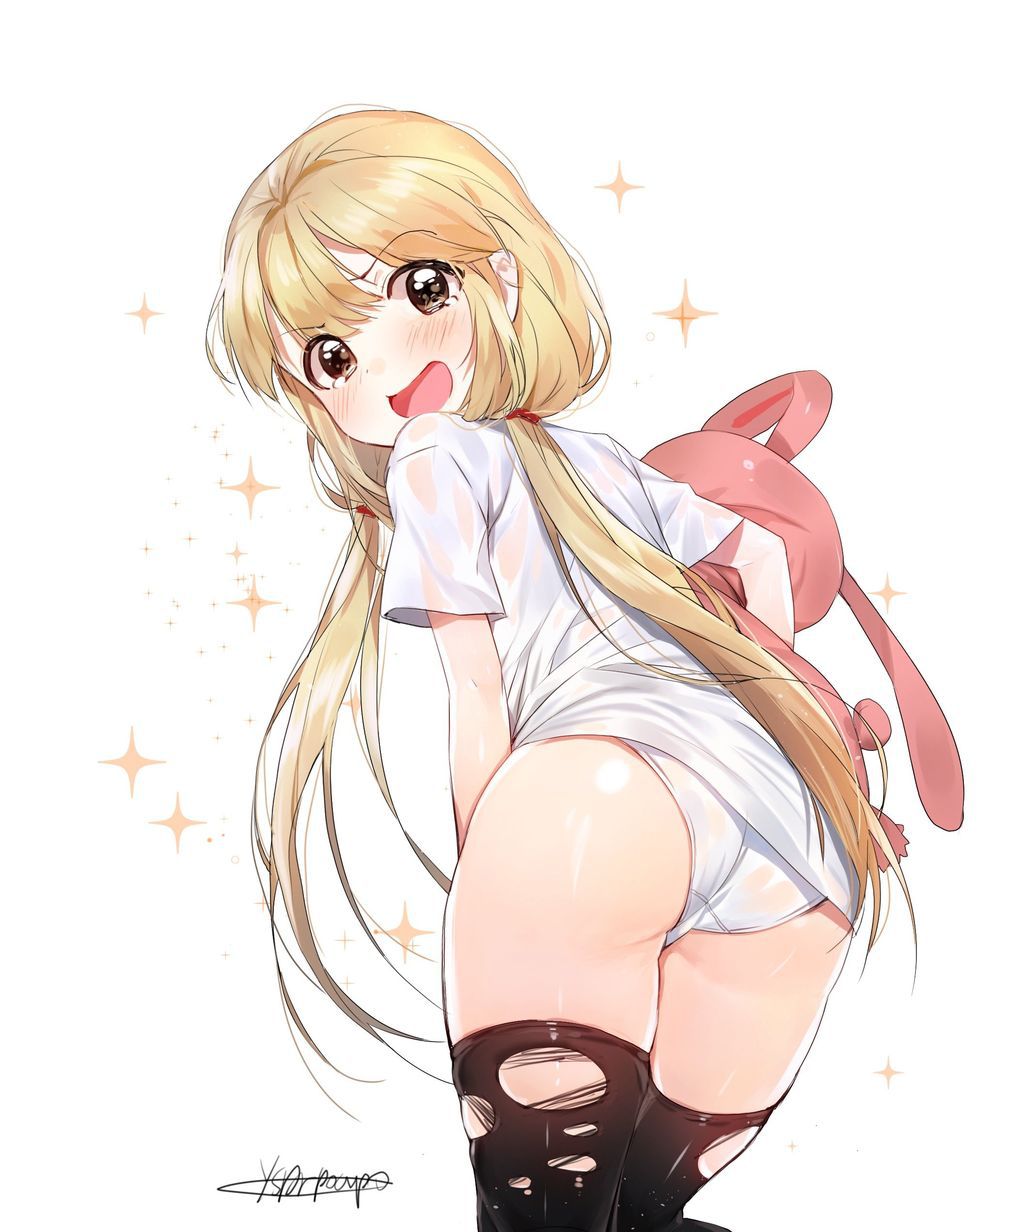 Secondary images of stockings Nuke about embarrassing it, too 38